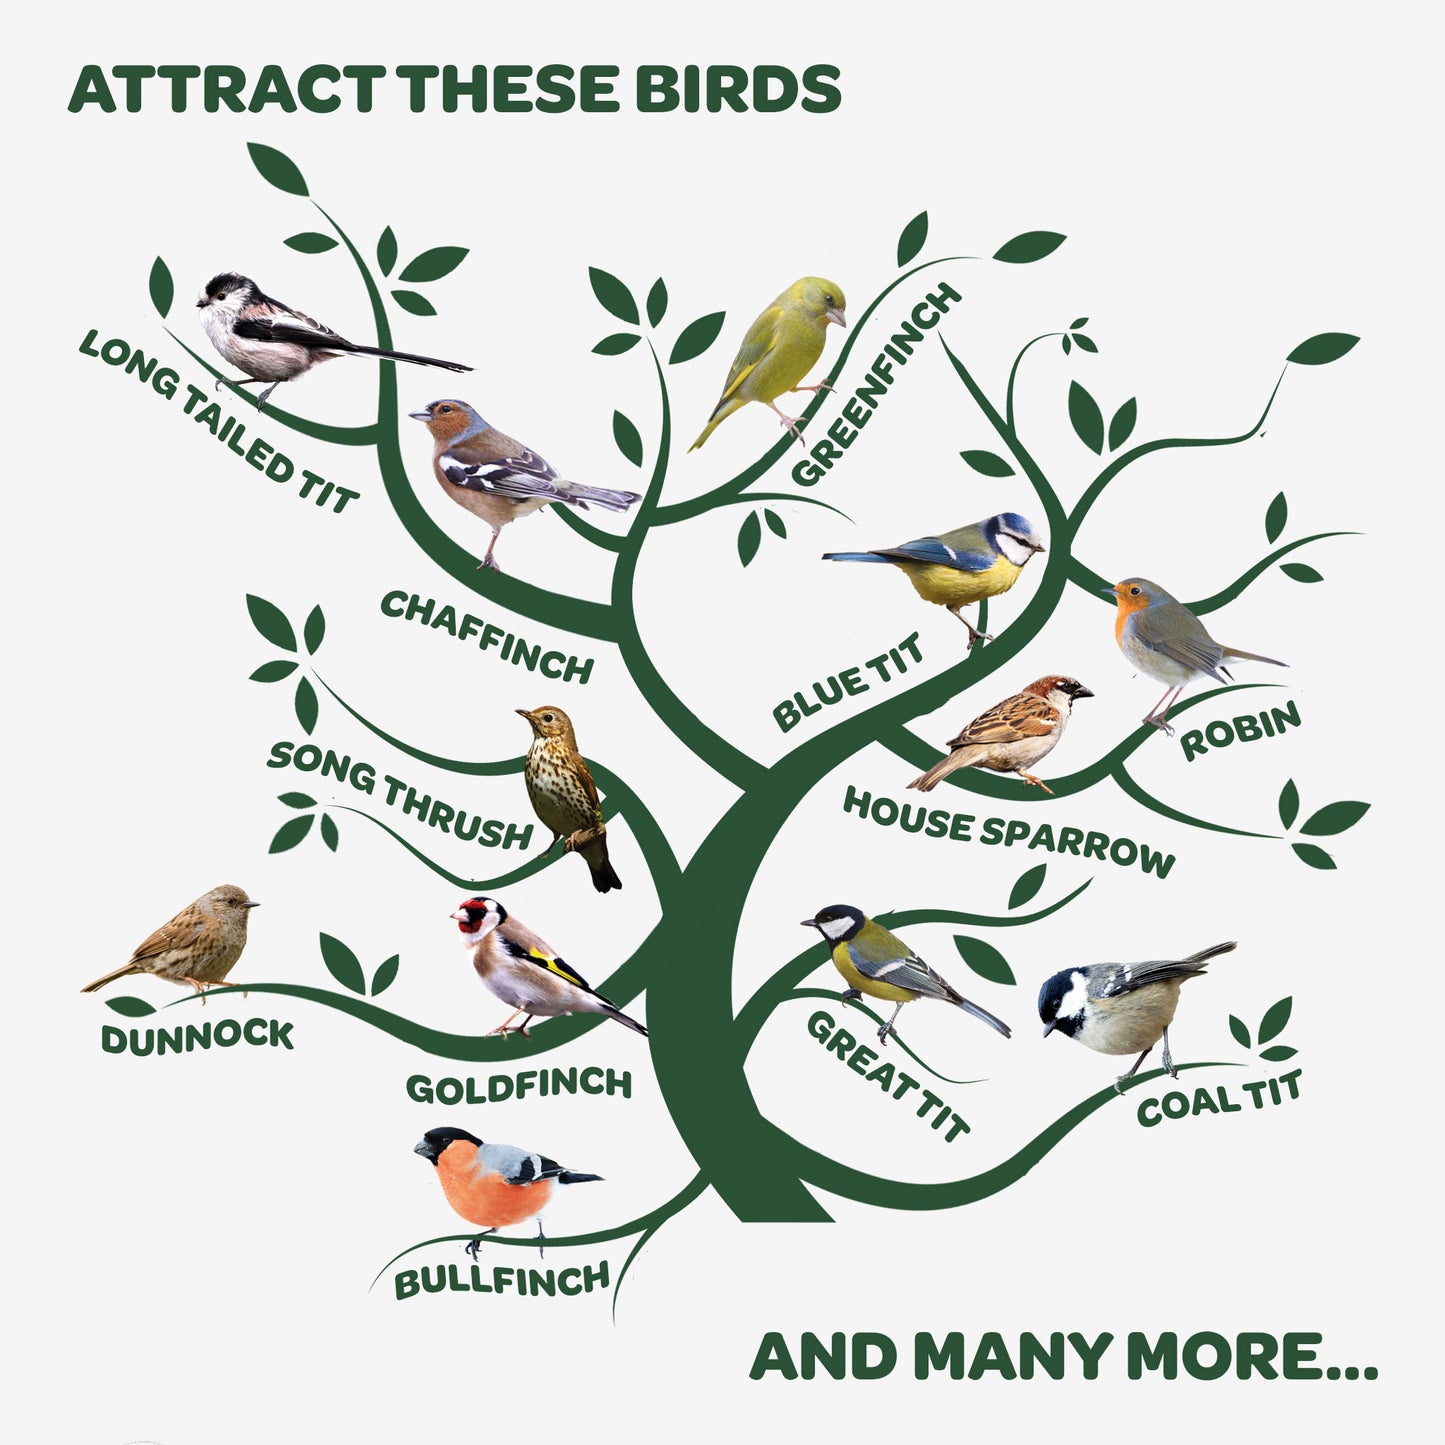 Peckish sunflower hearts feeder attracts these birds infographic